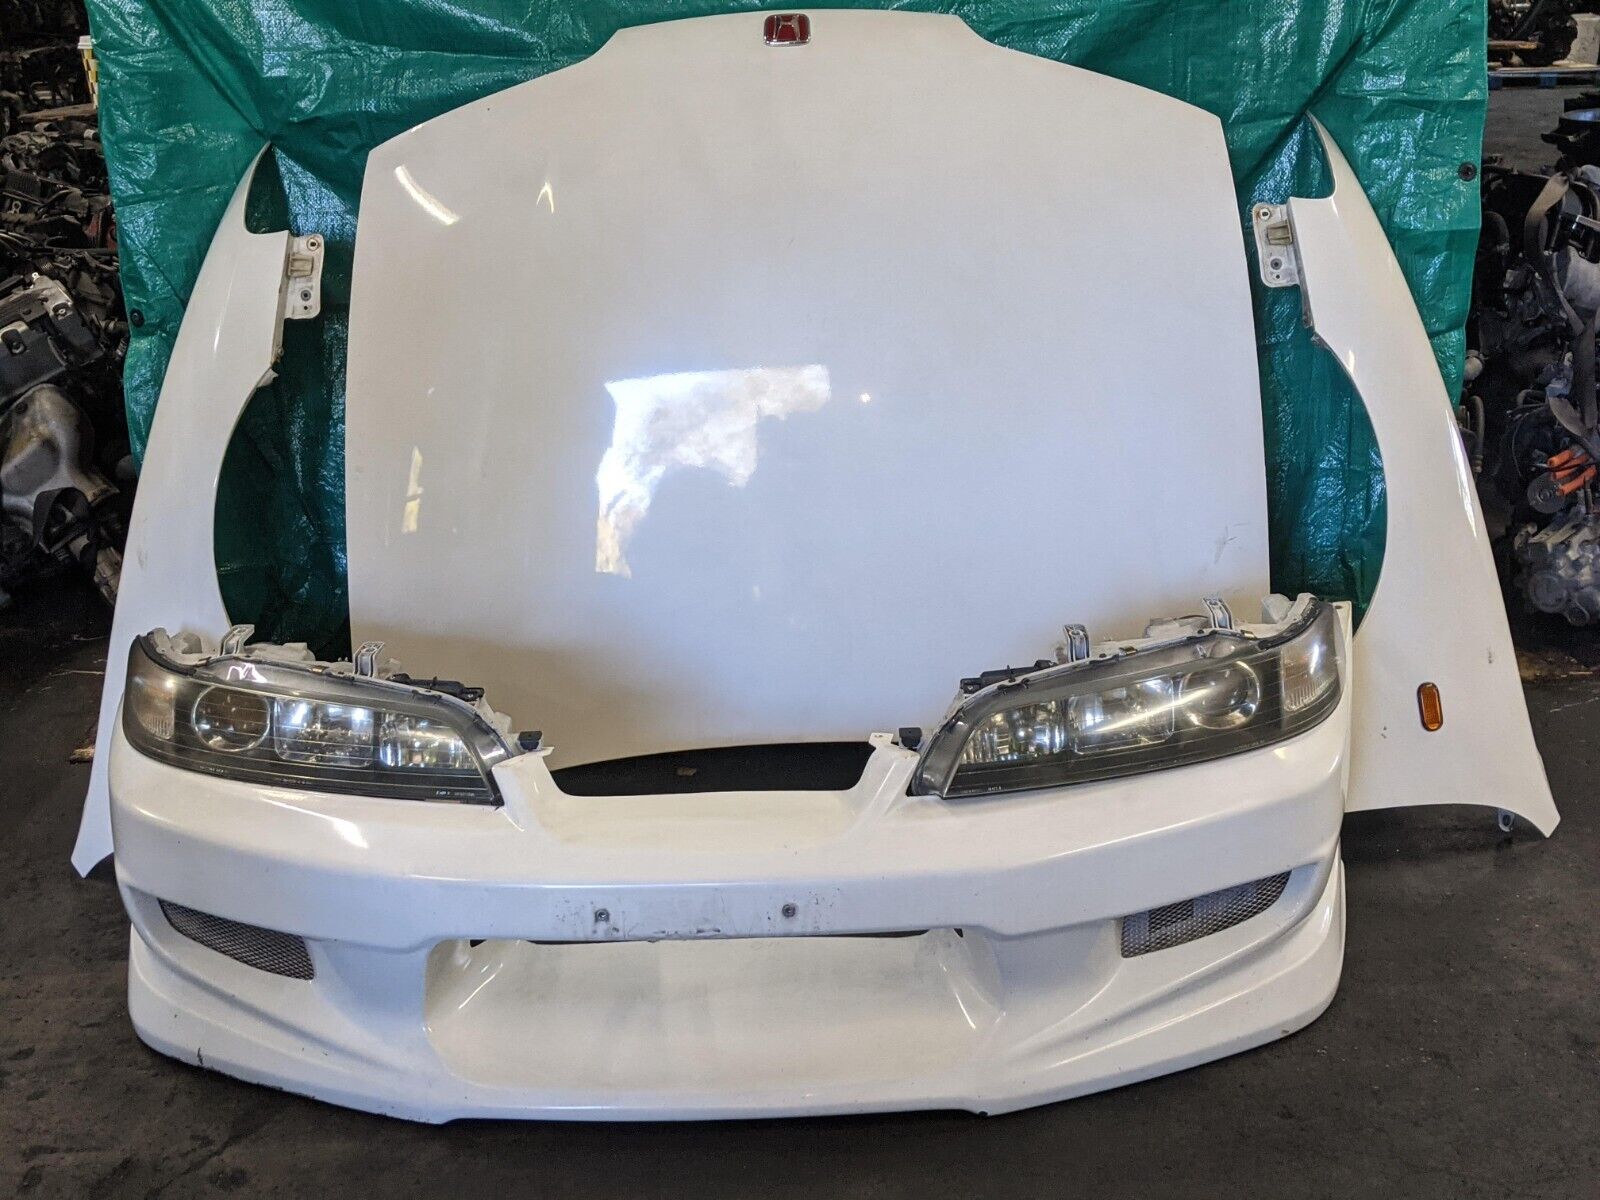 acura integra jdm front end conversion kit